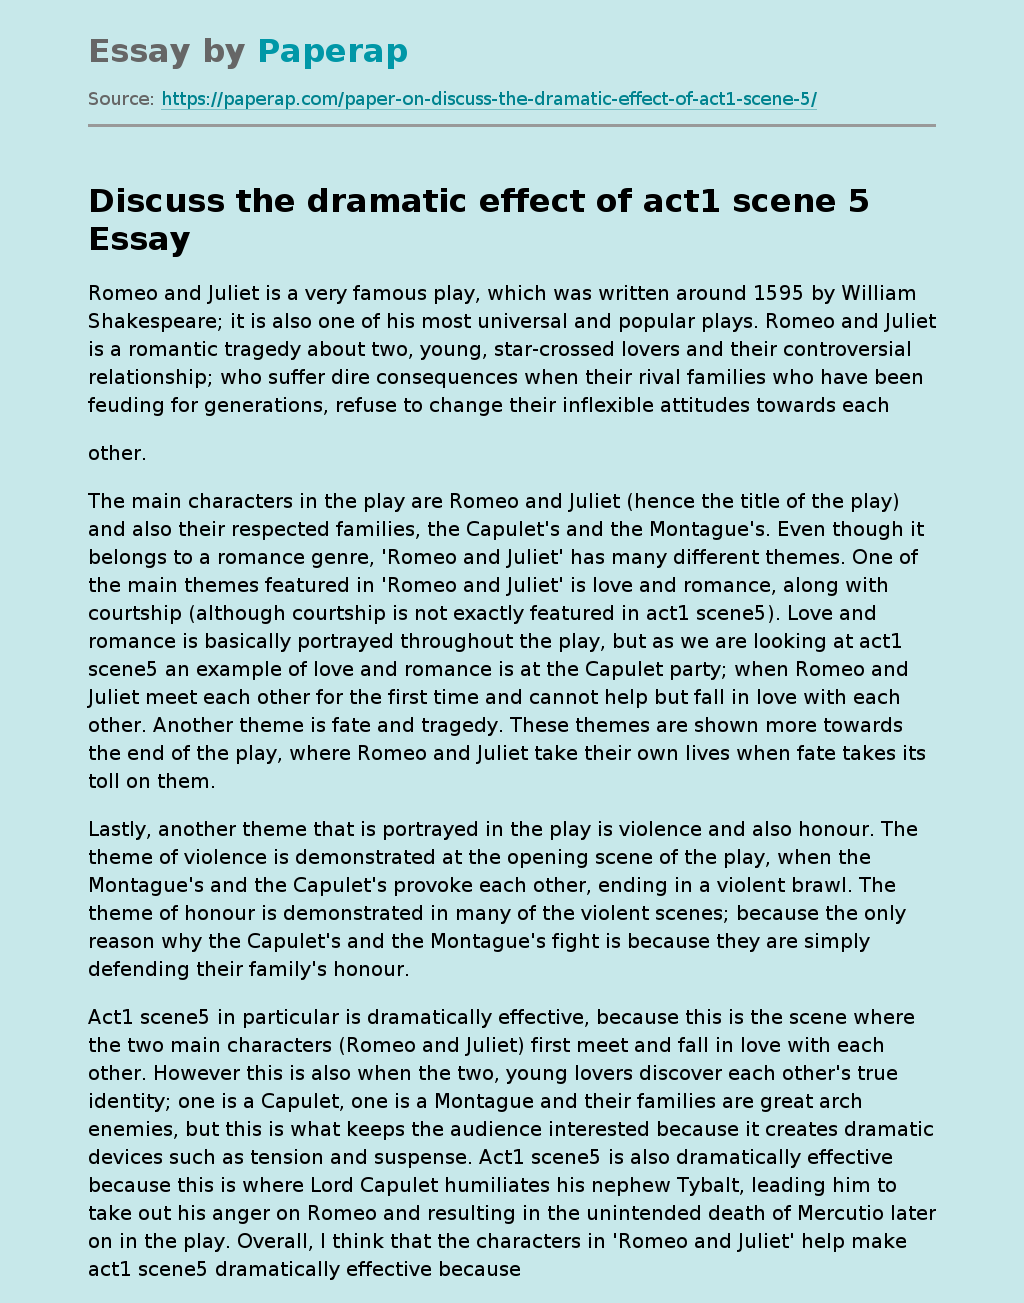 Discuss the dramatic effect of act1 scene 5